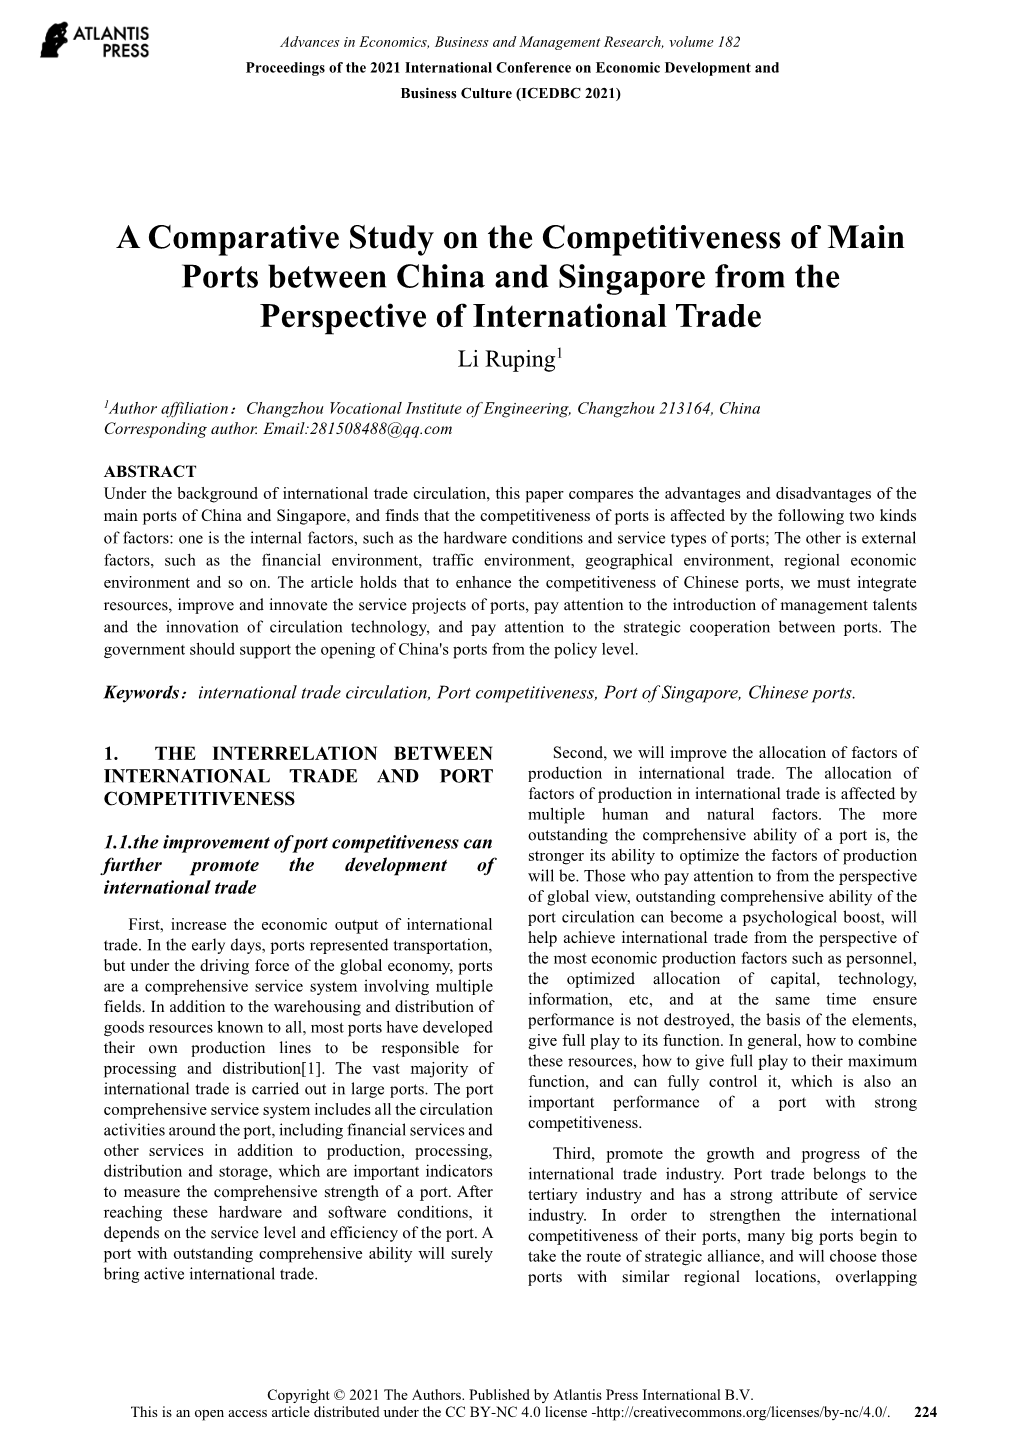 A Comparative Study on the Competitiveness of Main Ports Between China and Singapore from the Perspective of International Trade Li Ruping1